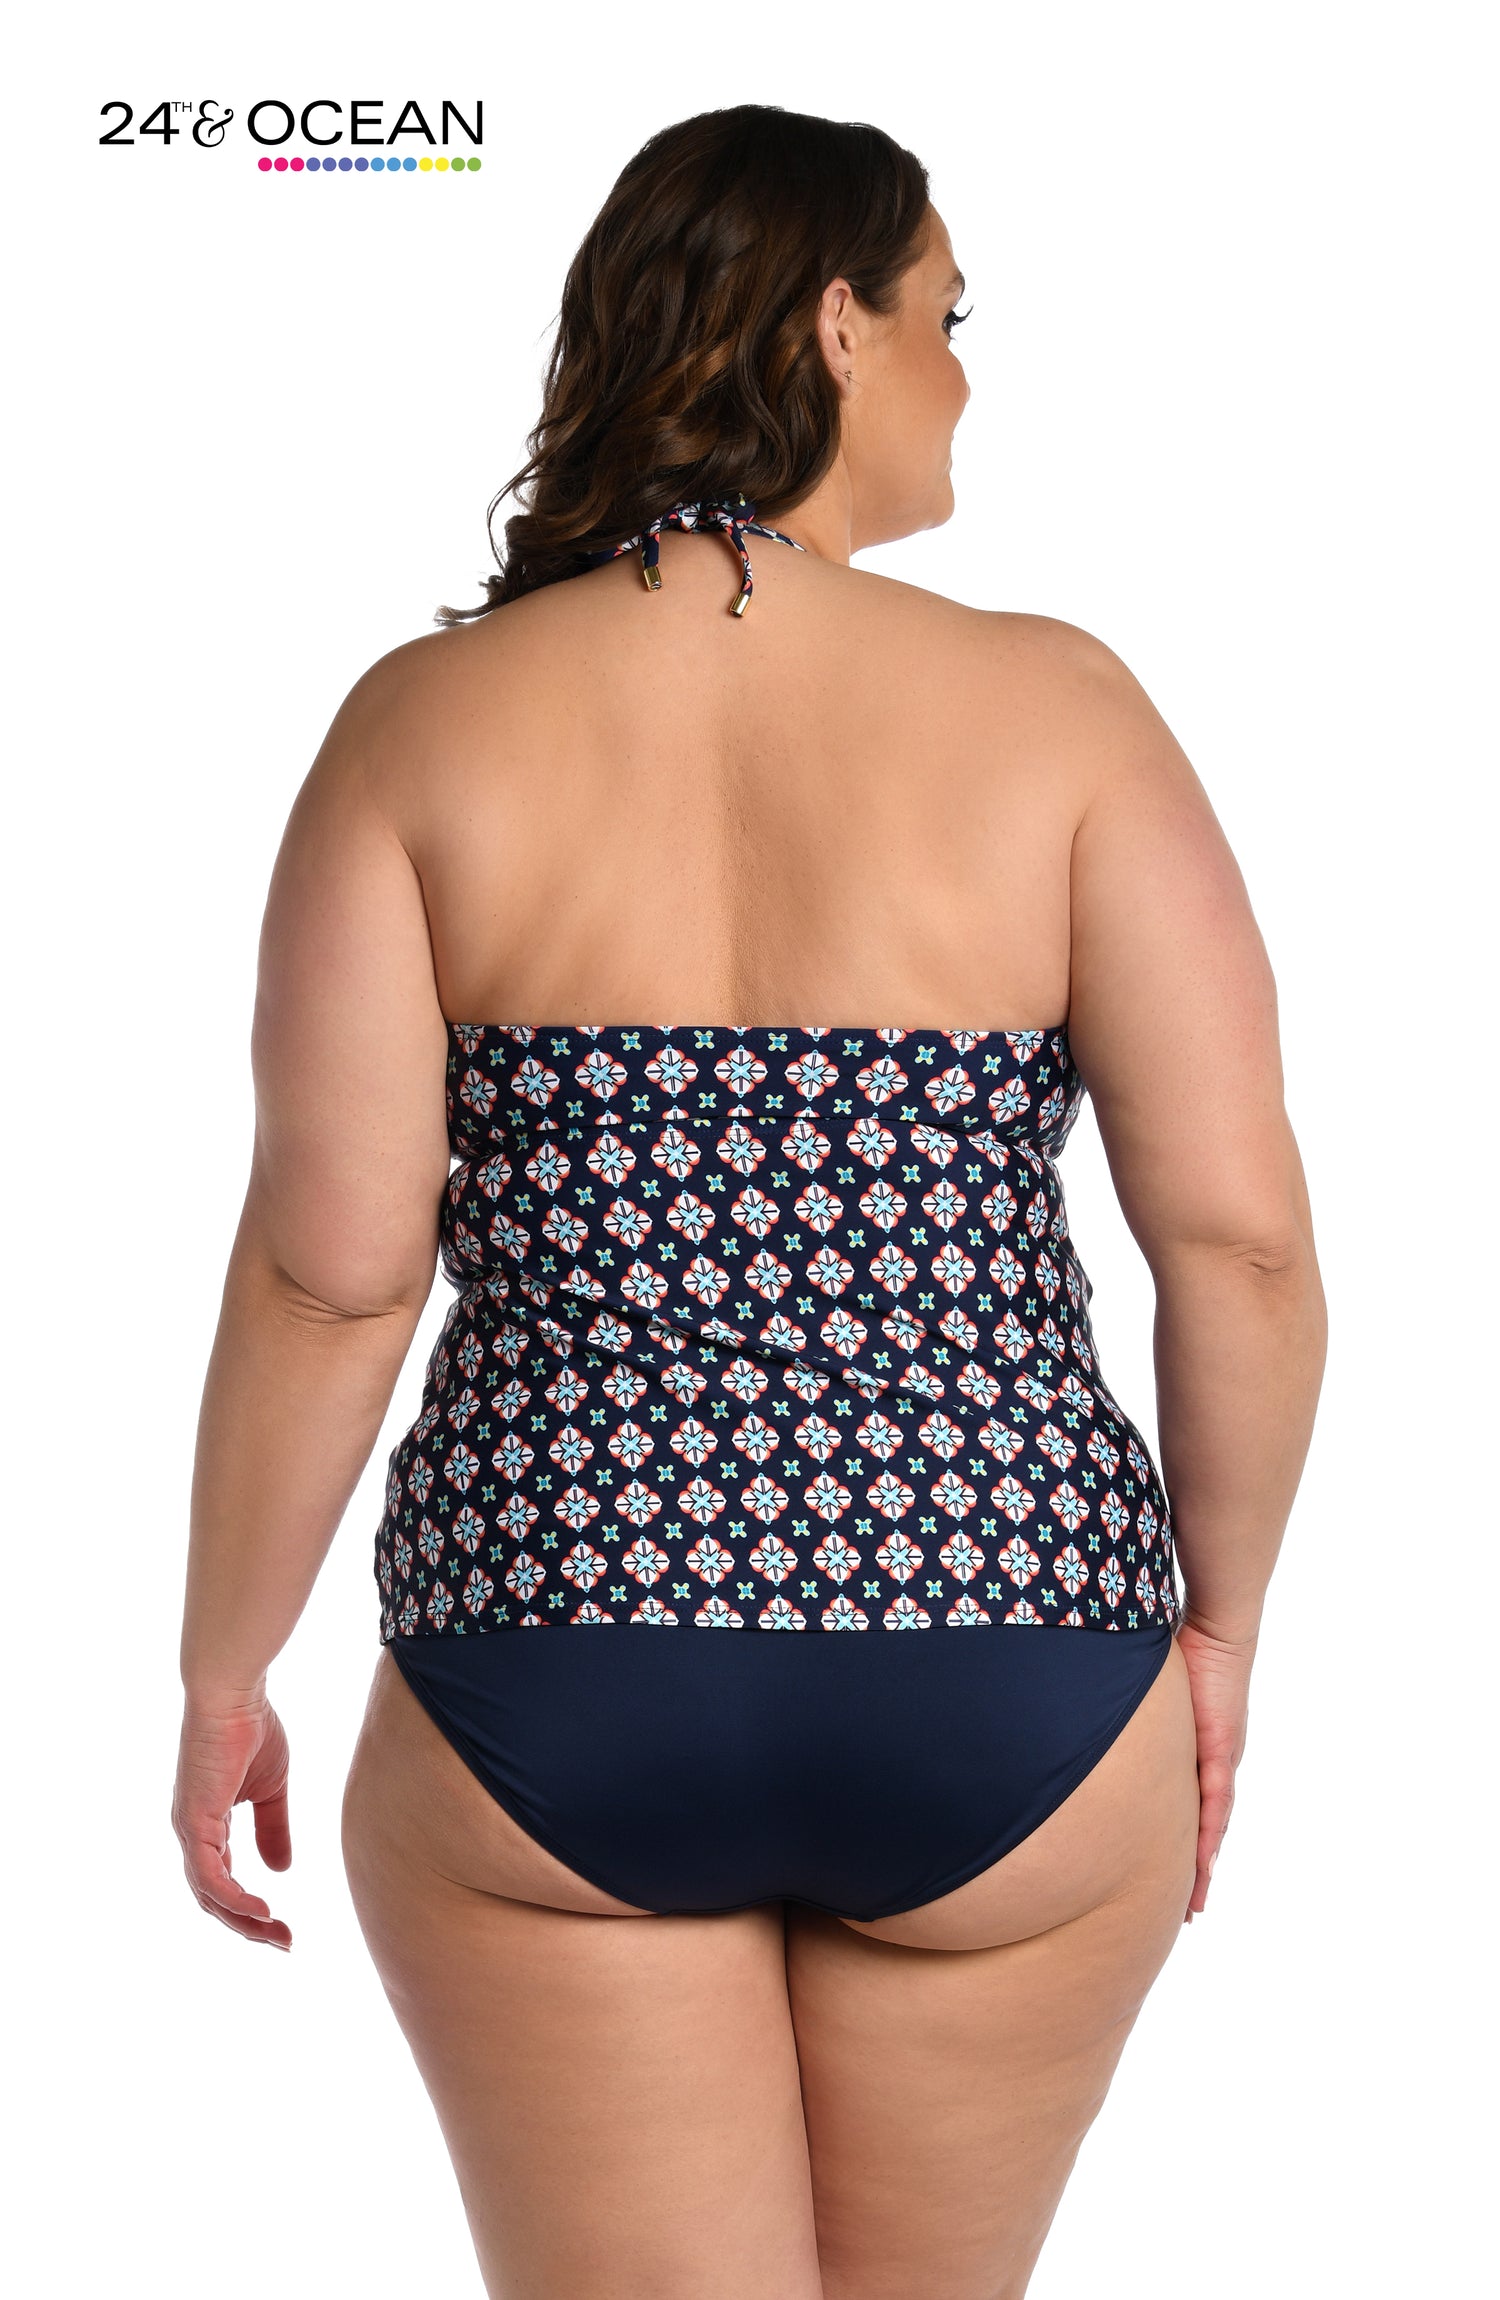 Model is wearing a midnight multi colored geometric printed high neck tankini top from our Alexandria Tile collection!